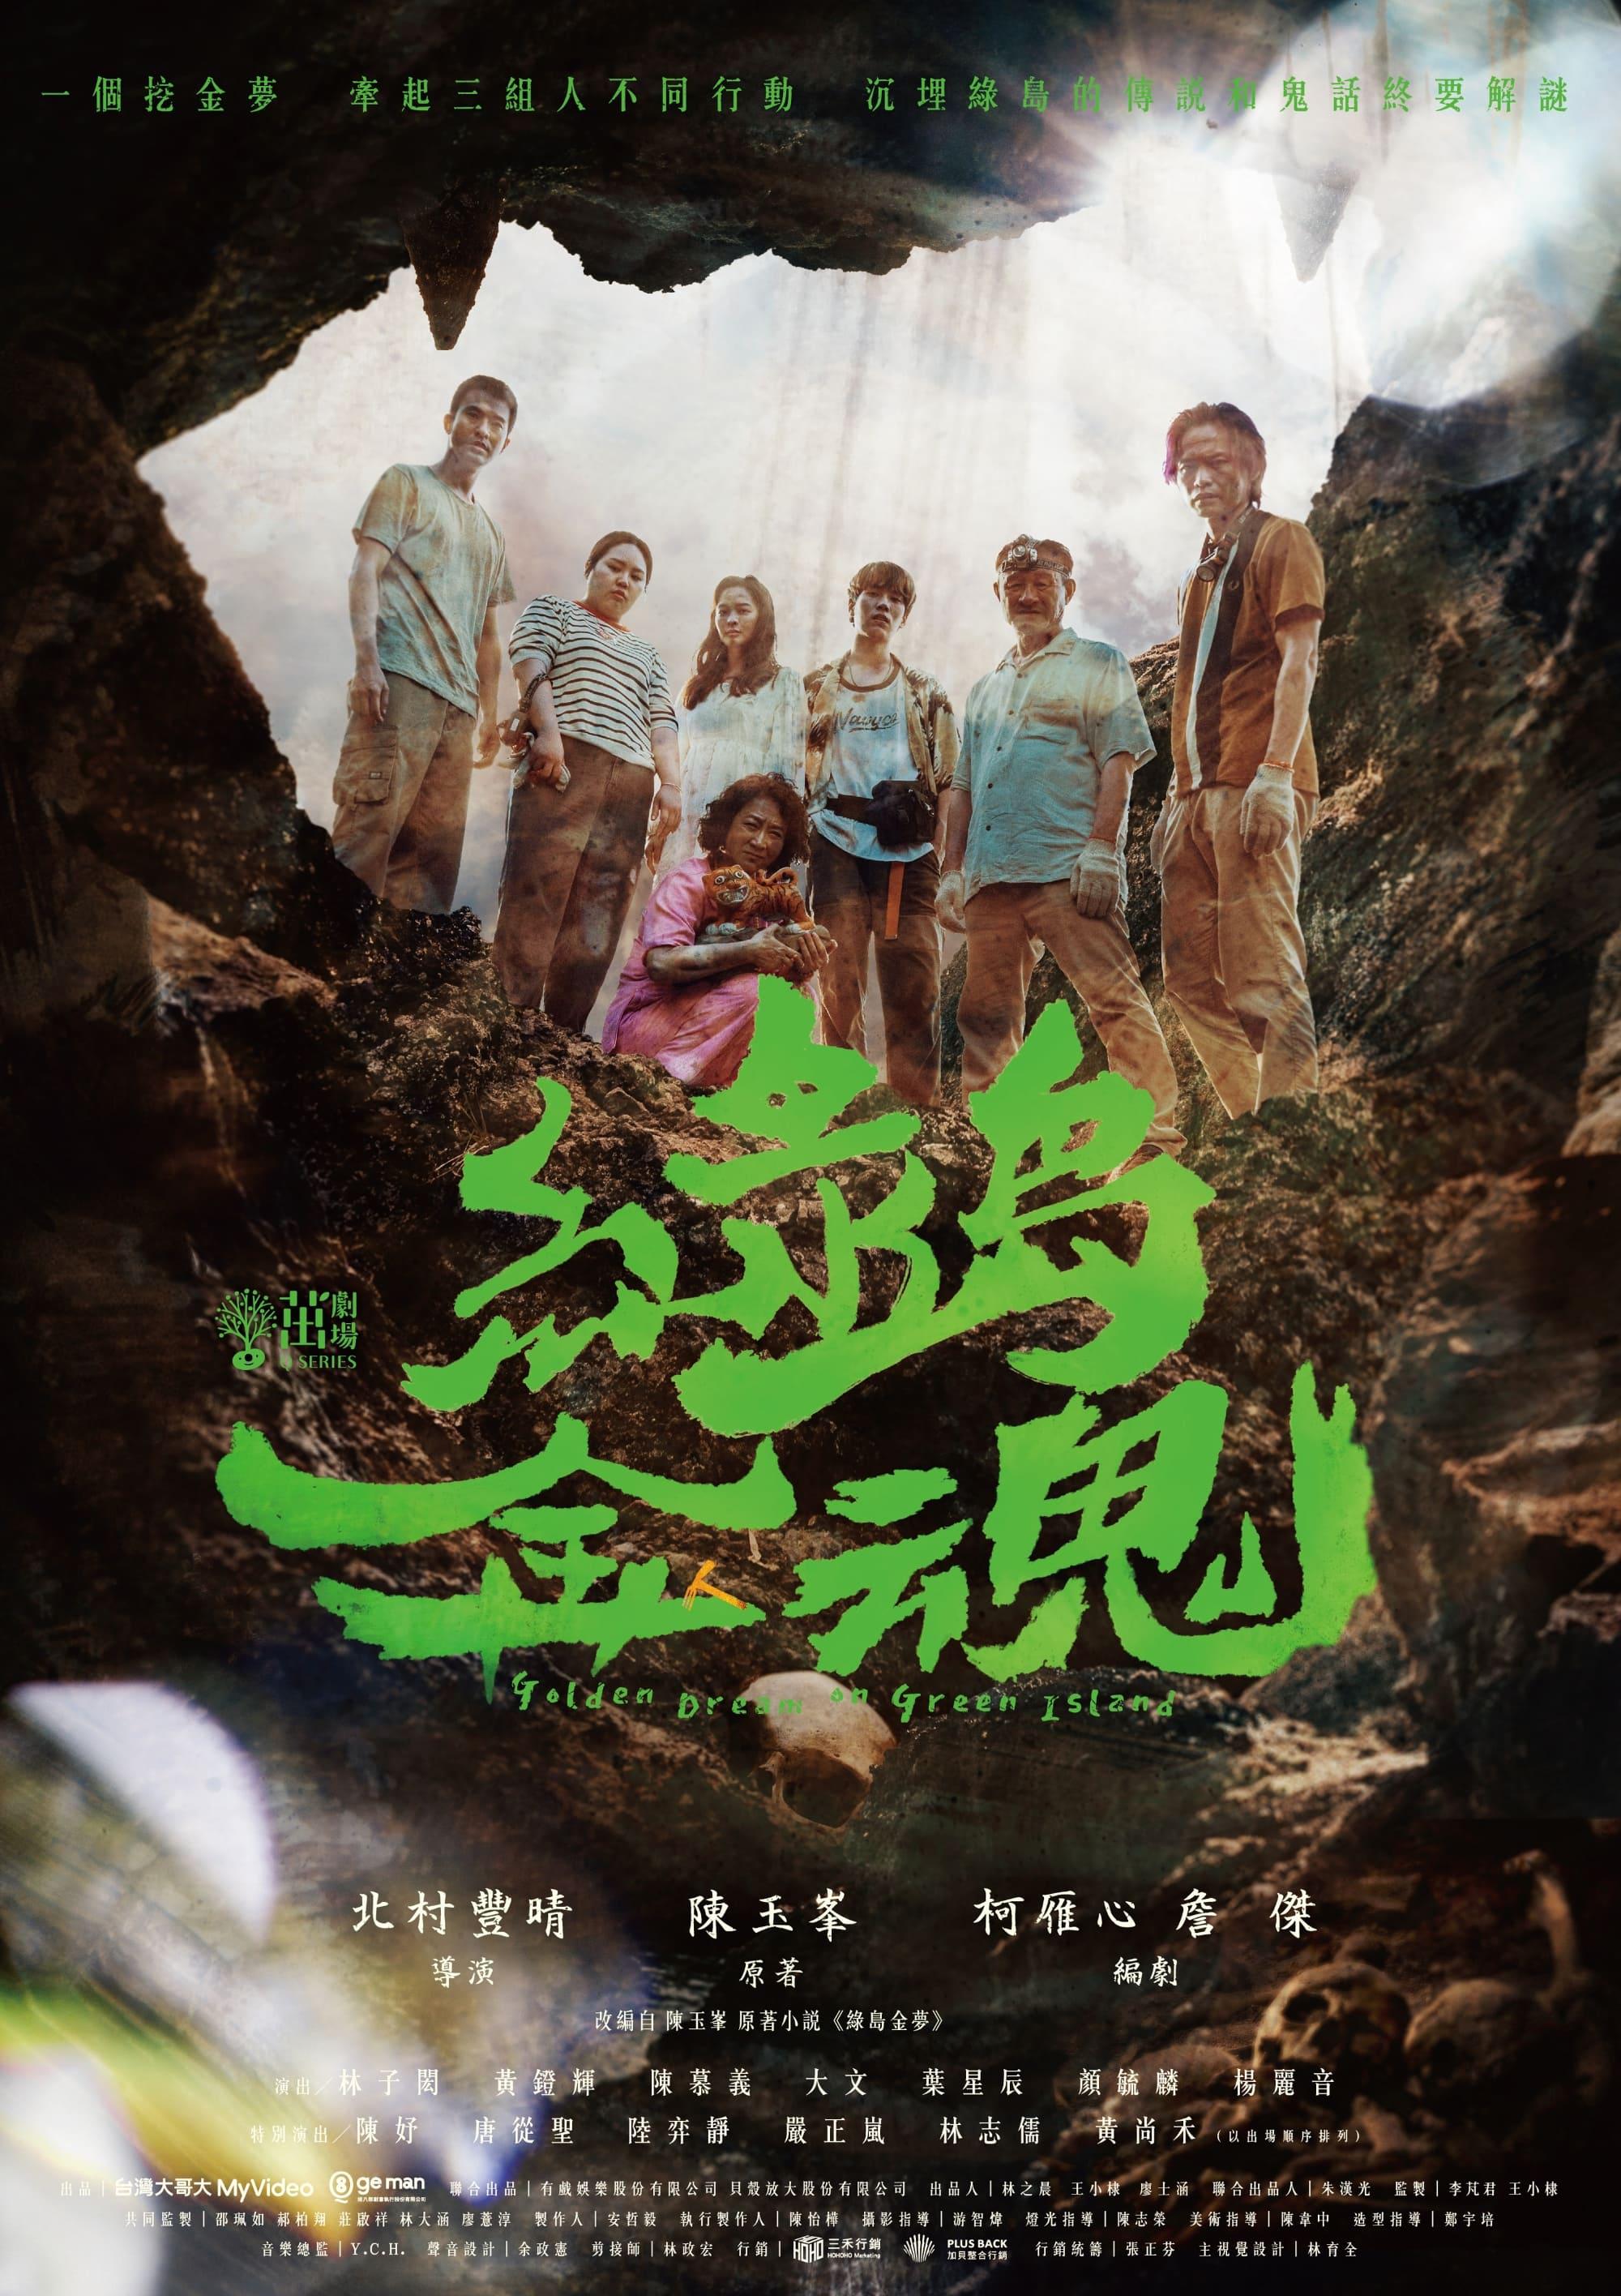 TV ratings for Golden Dream On Green Island (綠島金魂) in Tailandia. PTS TV series